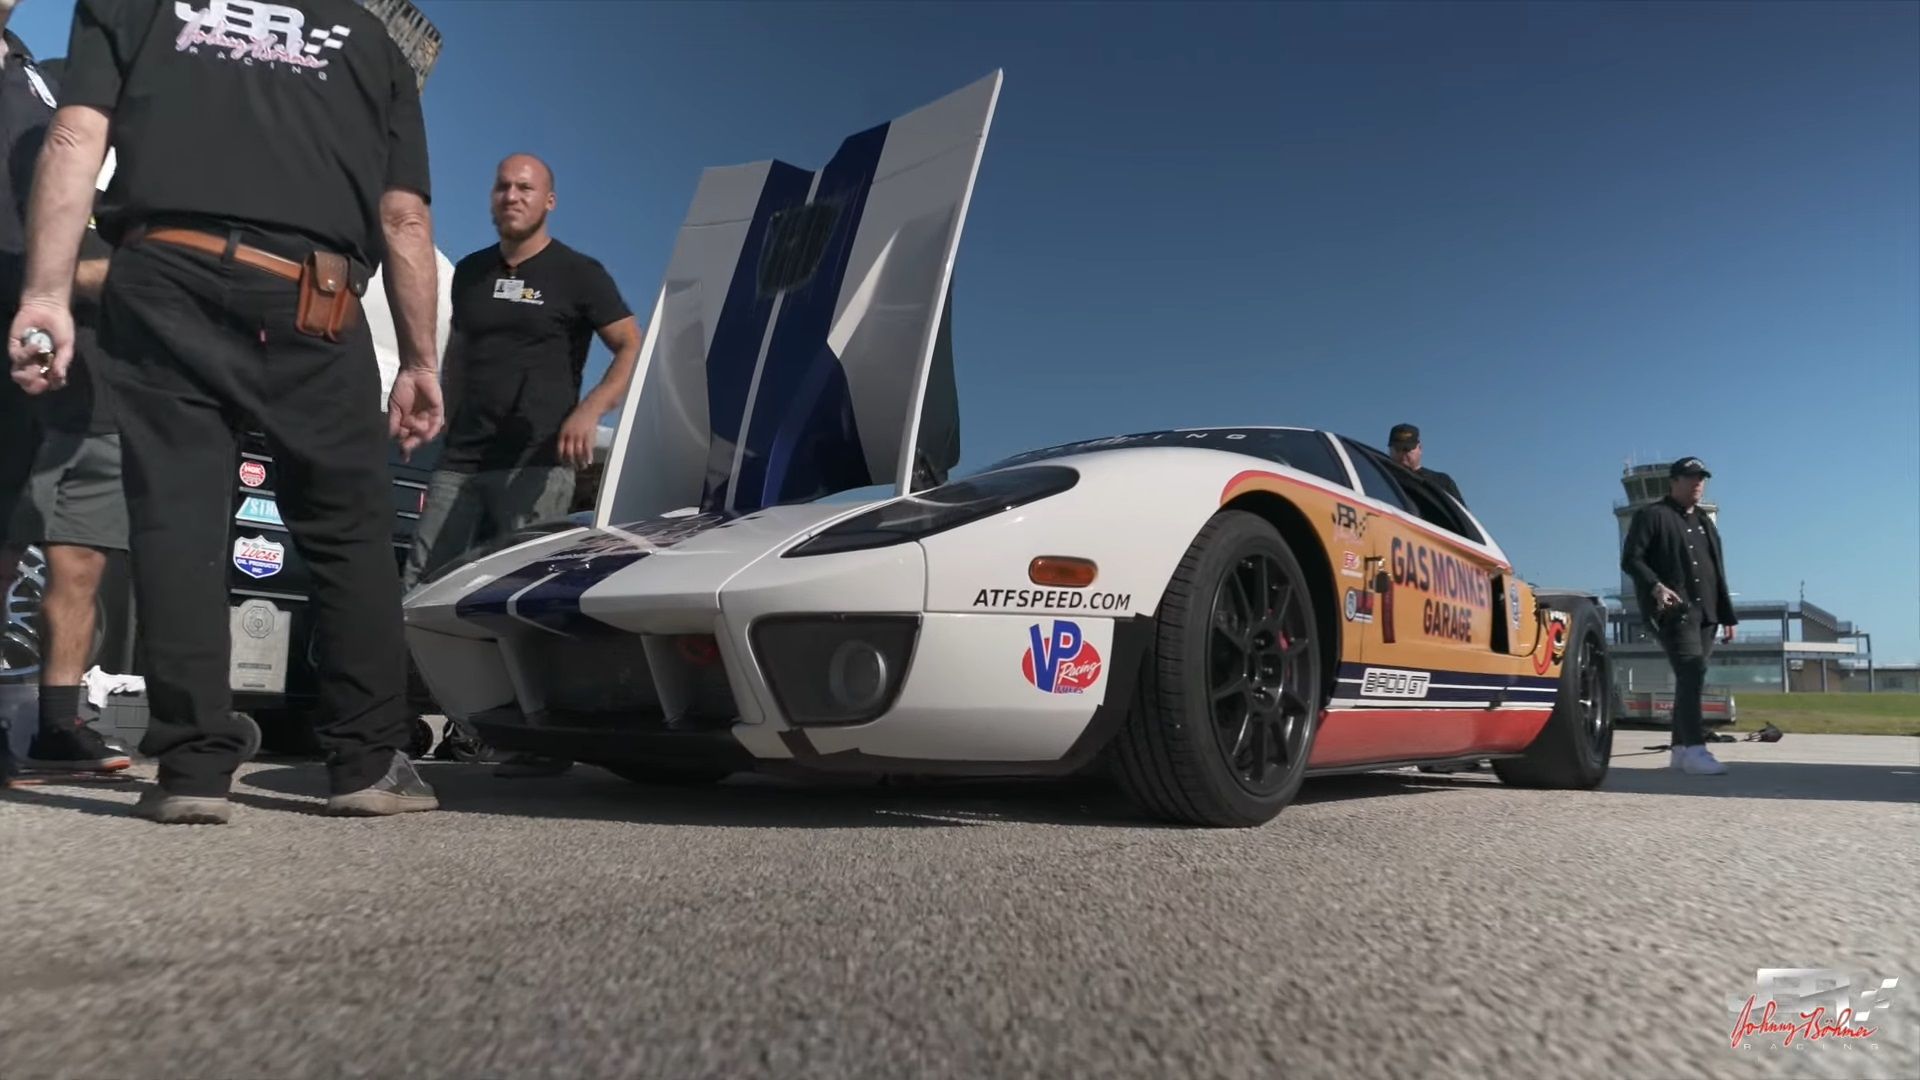 The team around the 2006 Ford GT “BADD GT” before its run to 310.8 MPH (500.1 KM_H) 0-2 screenshot